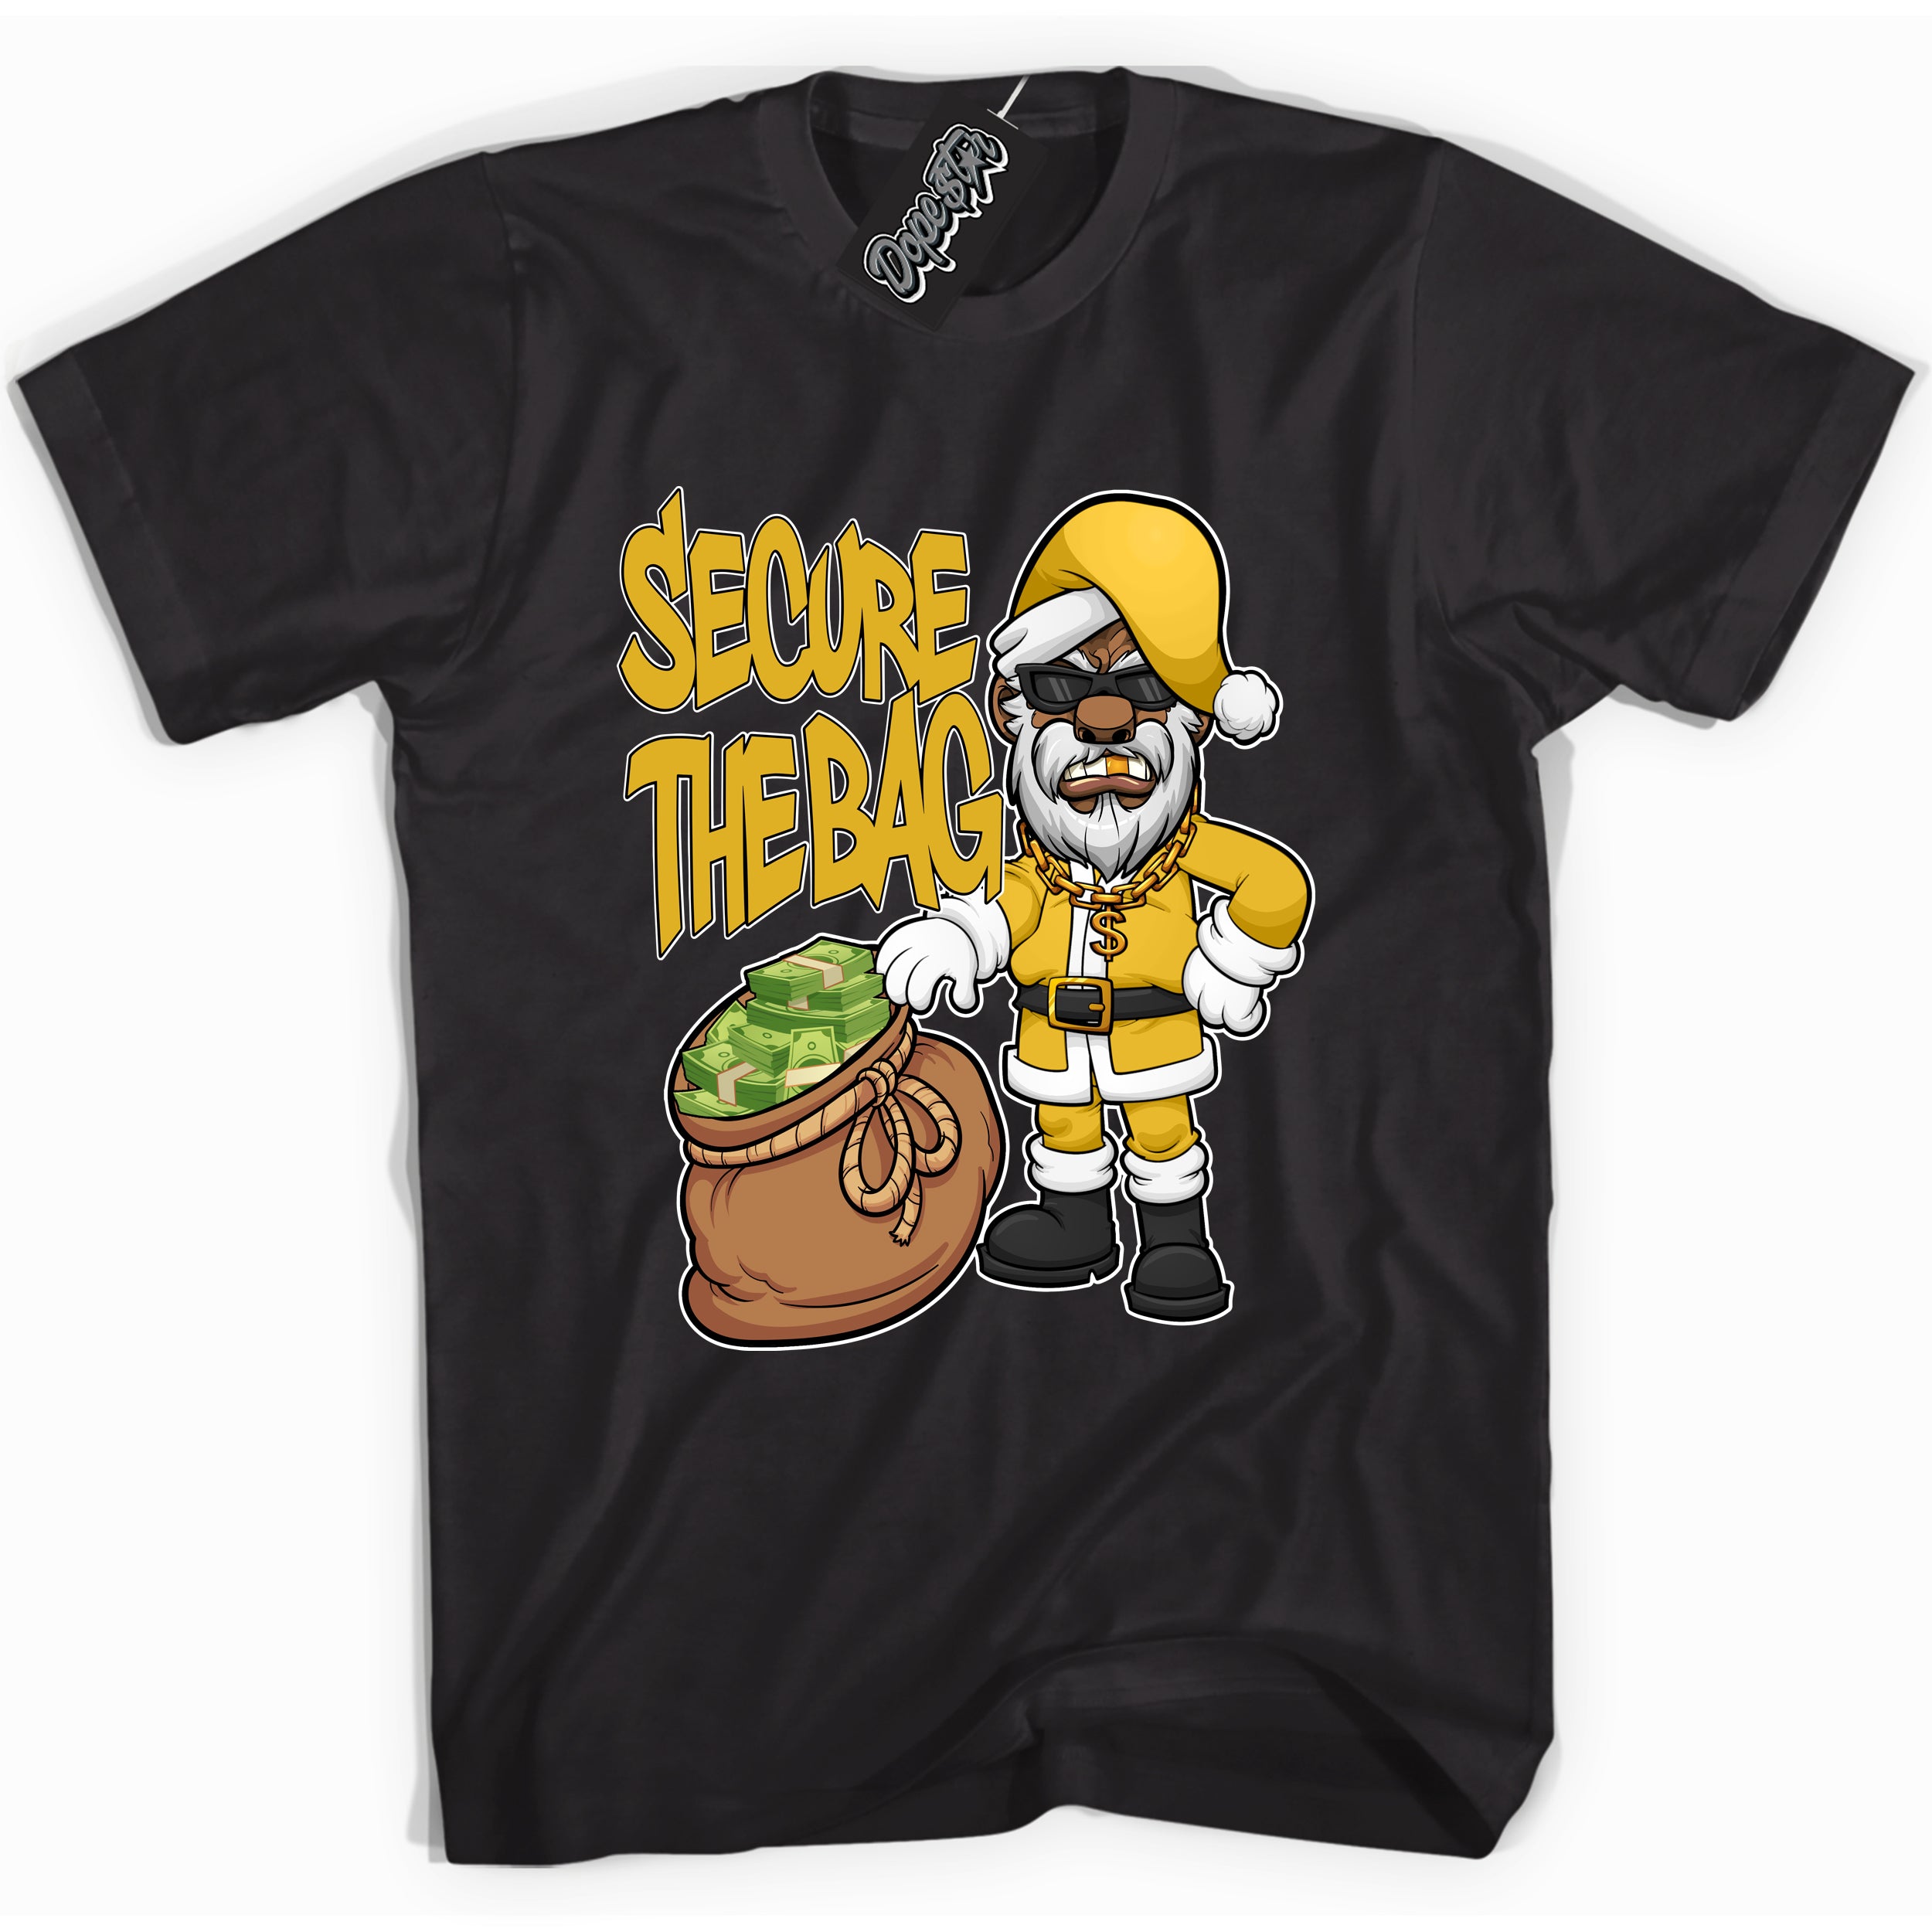 Cool Black Shirt with “ Secure The Bag Santa” design that perfectly matches Yellow Ochre 6s Sneakers.